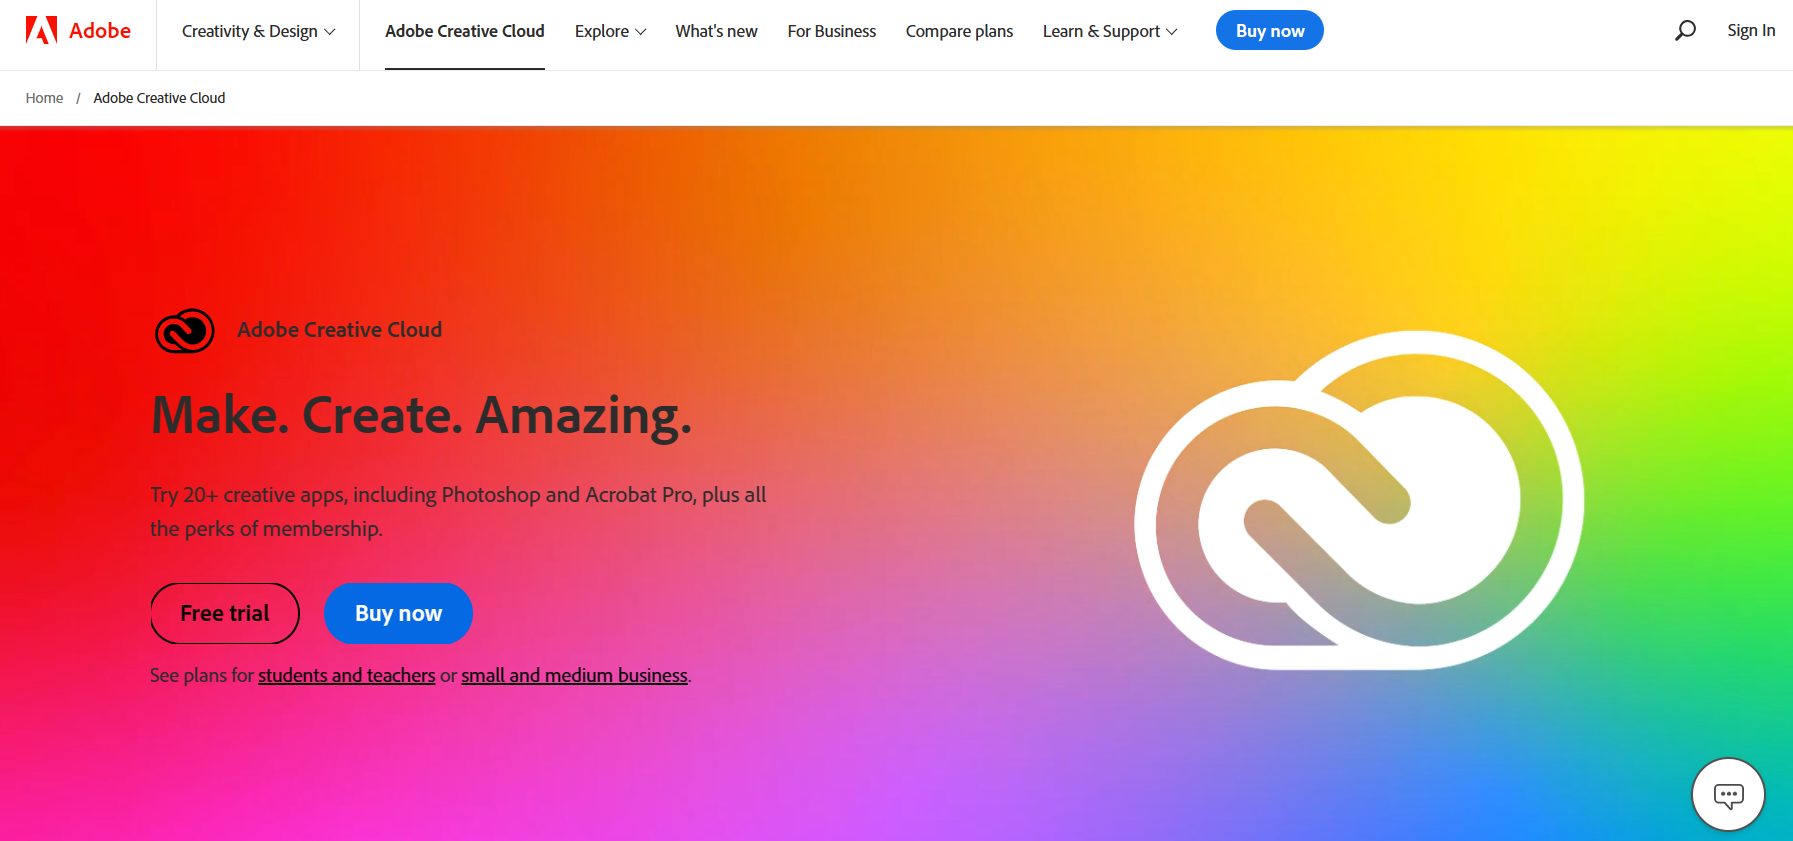 Adobe Creative Cloud: Exploring the Suite of Creative Tools and Services for Designers and Creatives